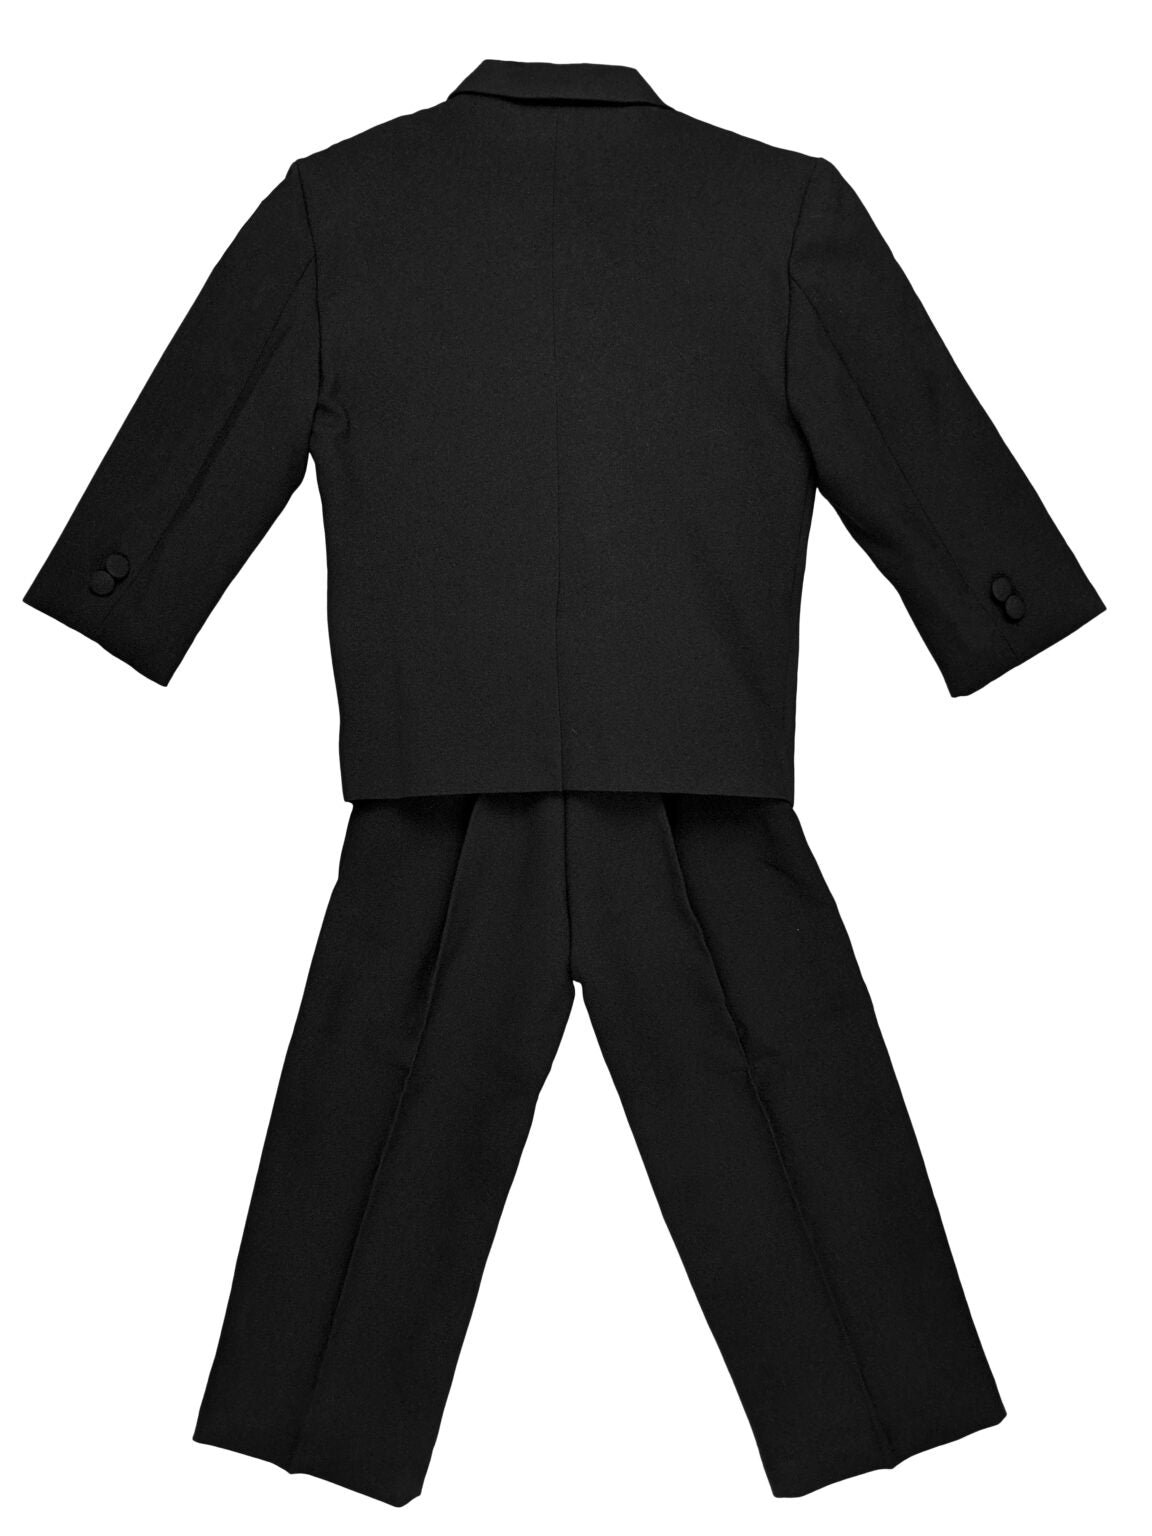 Boys Formal 5 Piece Suit with Shirt and Vest – Black - AH-BY013